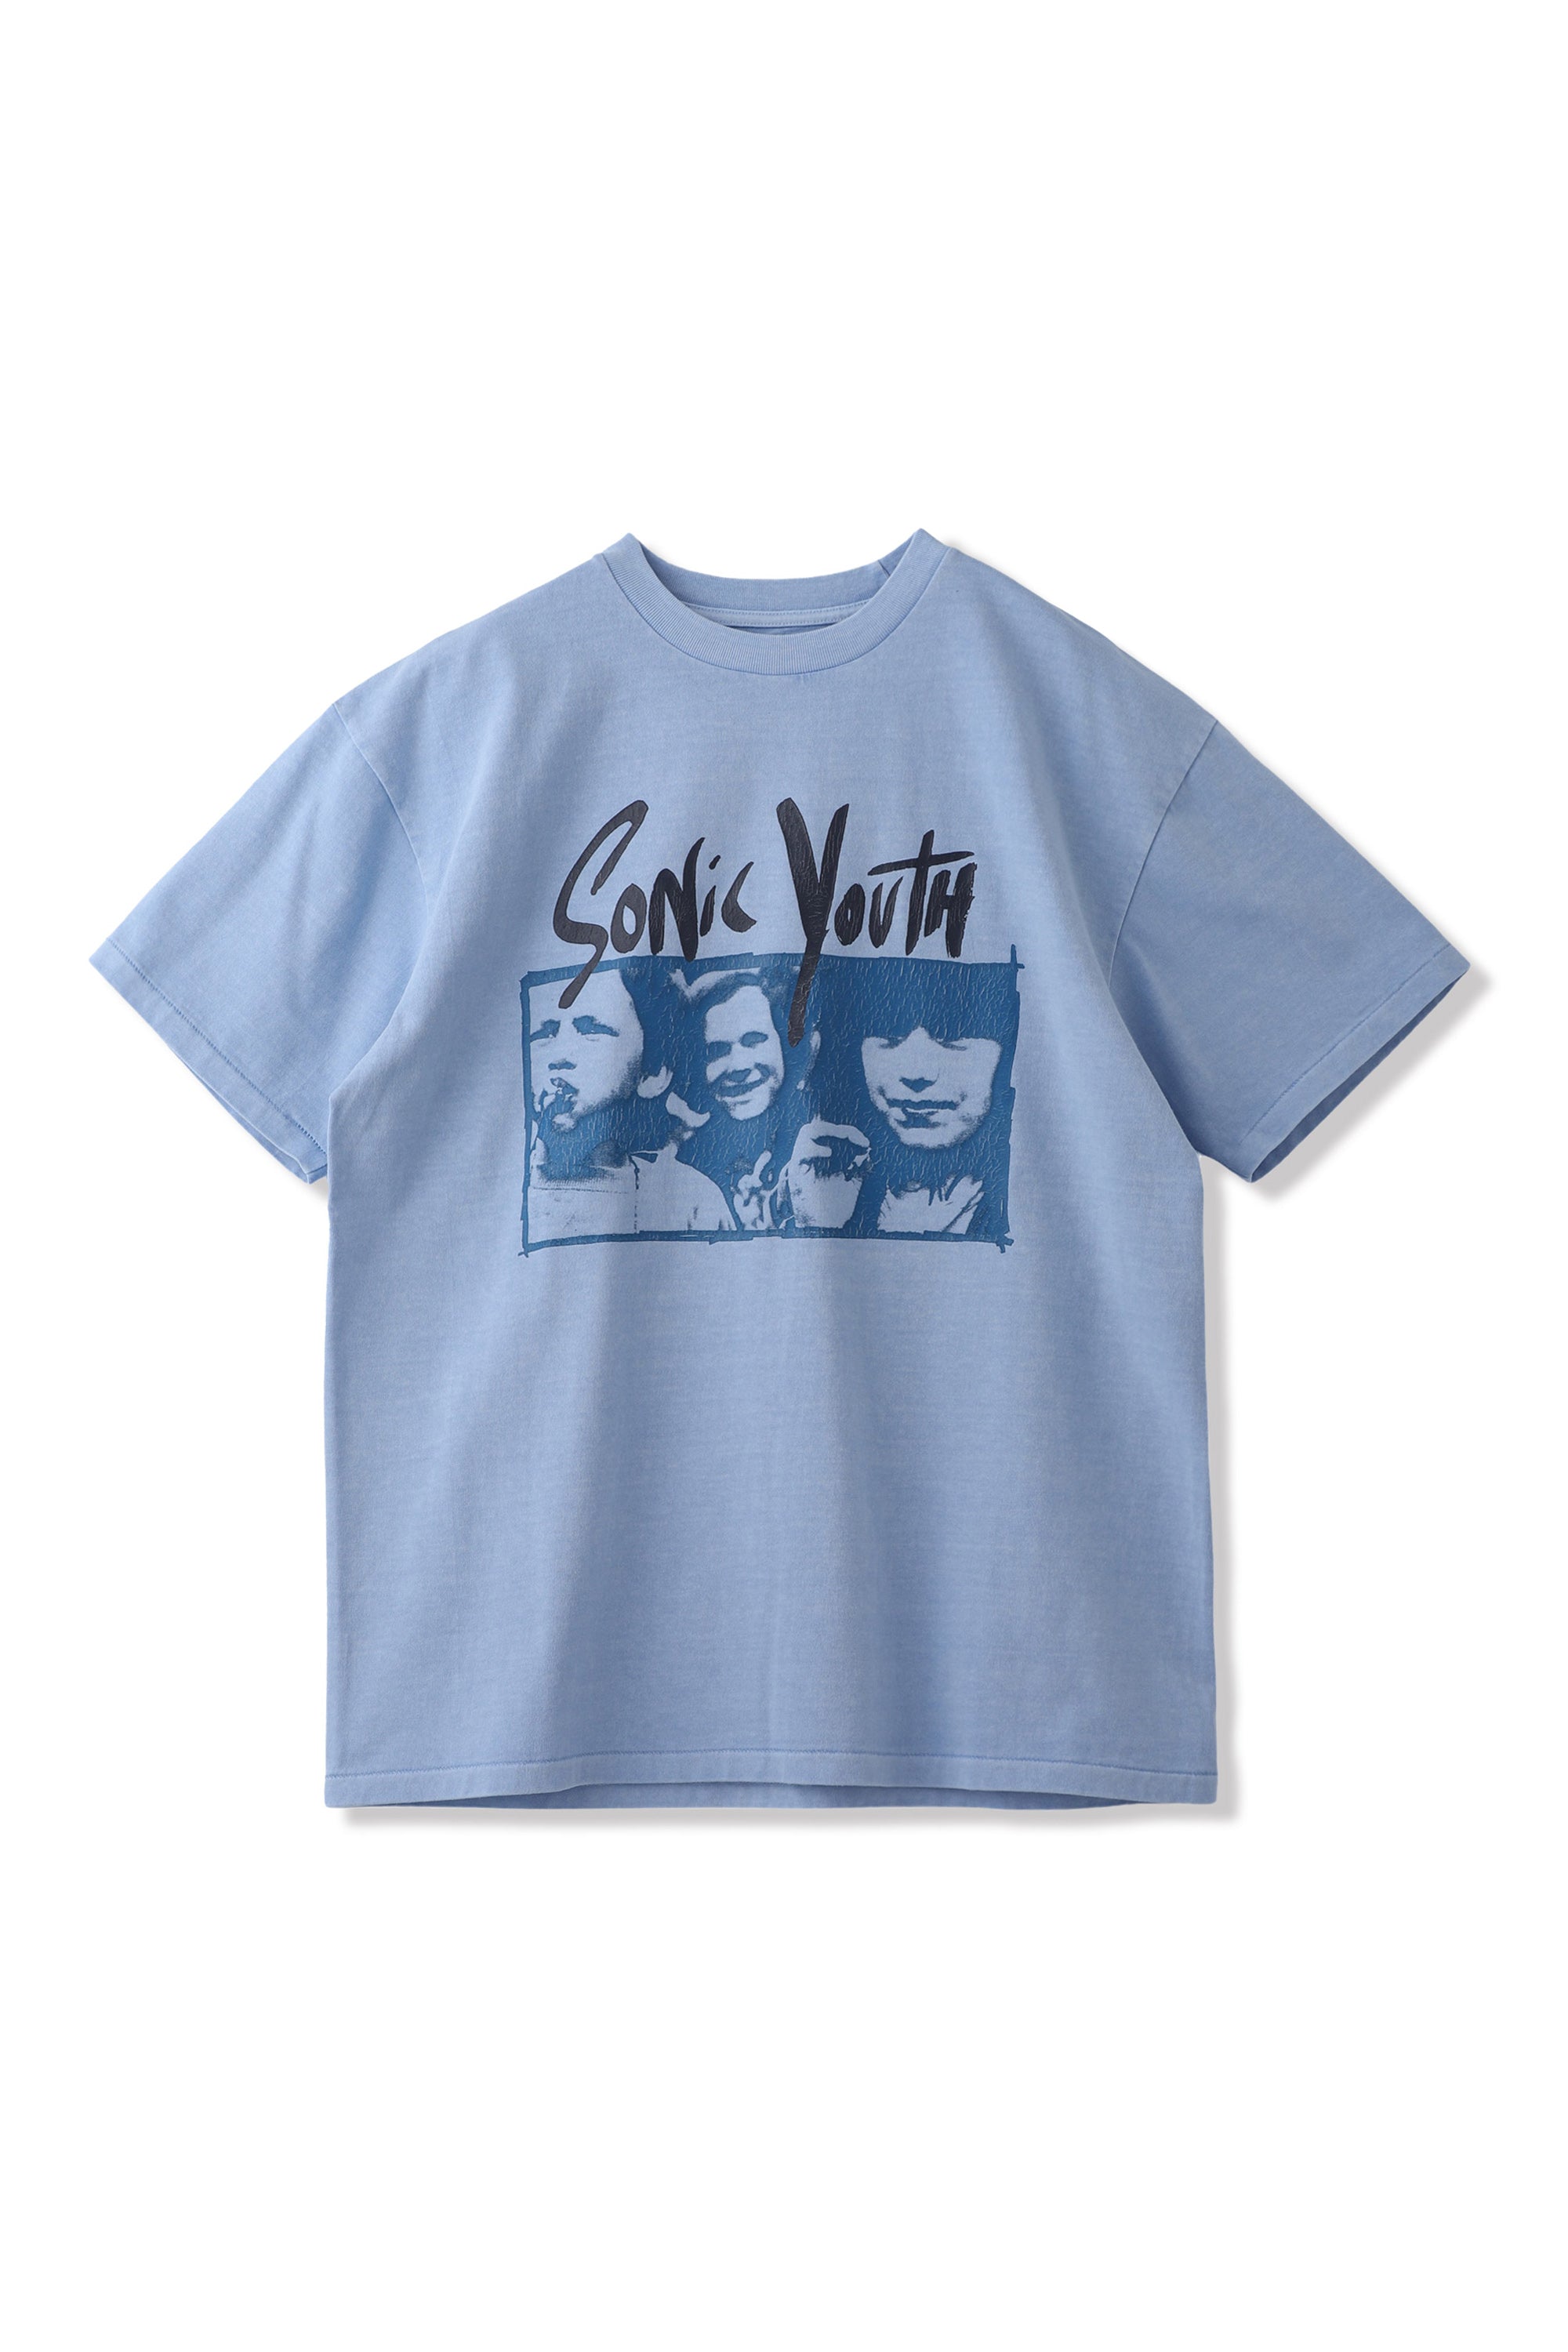 ×SONIC YOUTH SELF OBSESSED AND SEXXEE TEE SKY